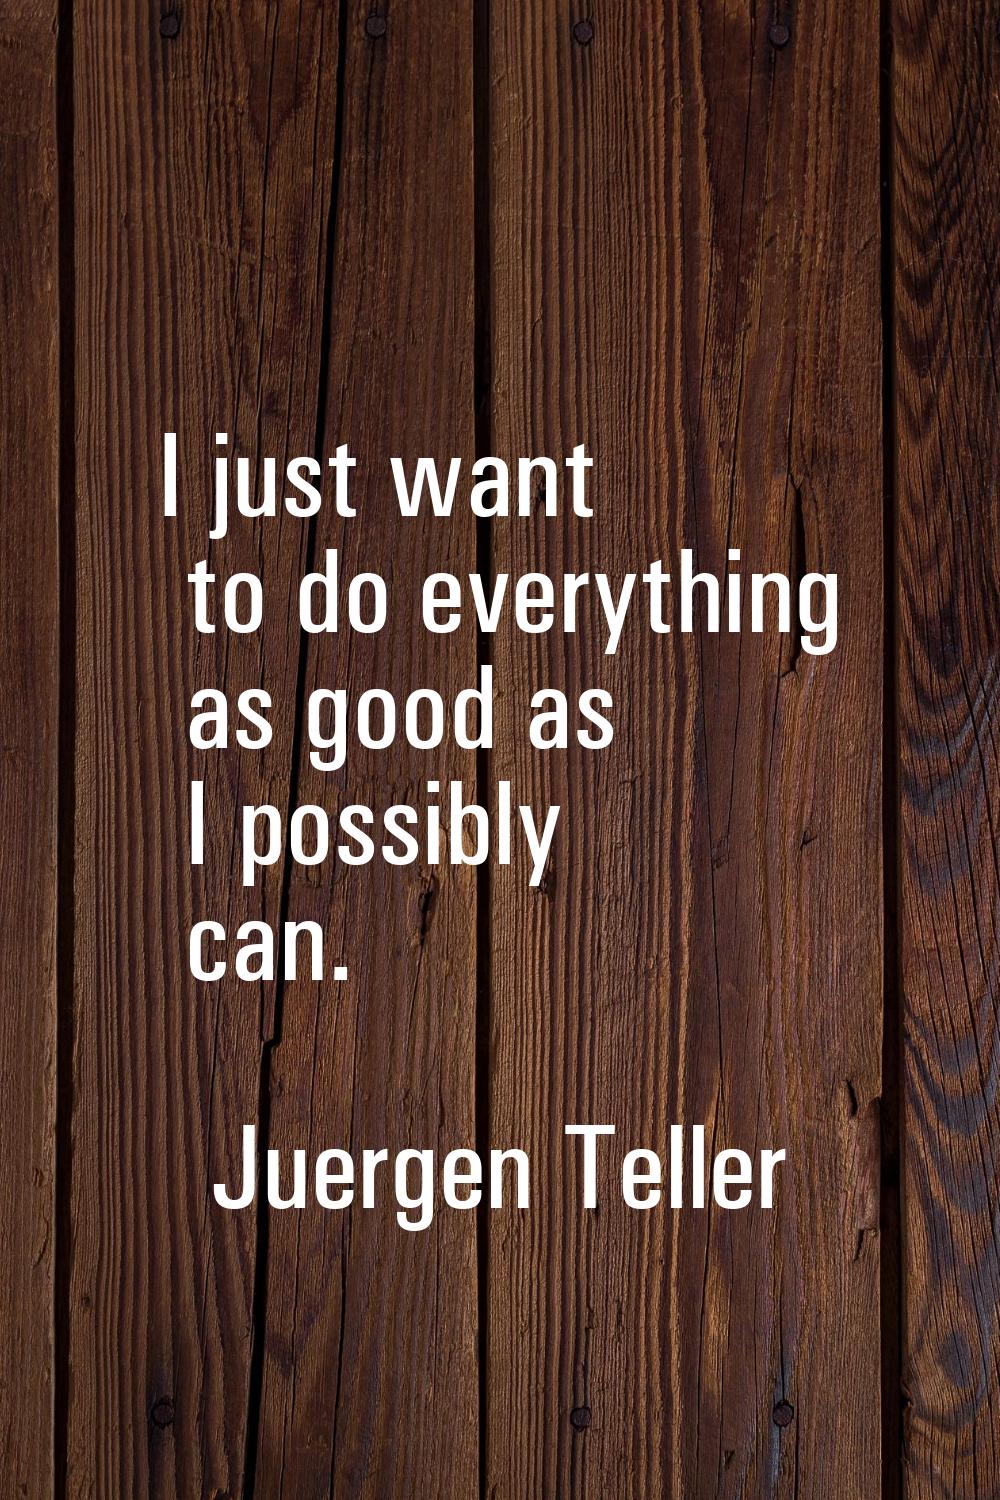 I just want to do everything as good as I possibly can.